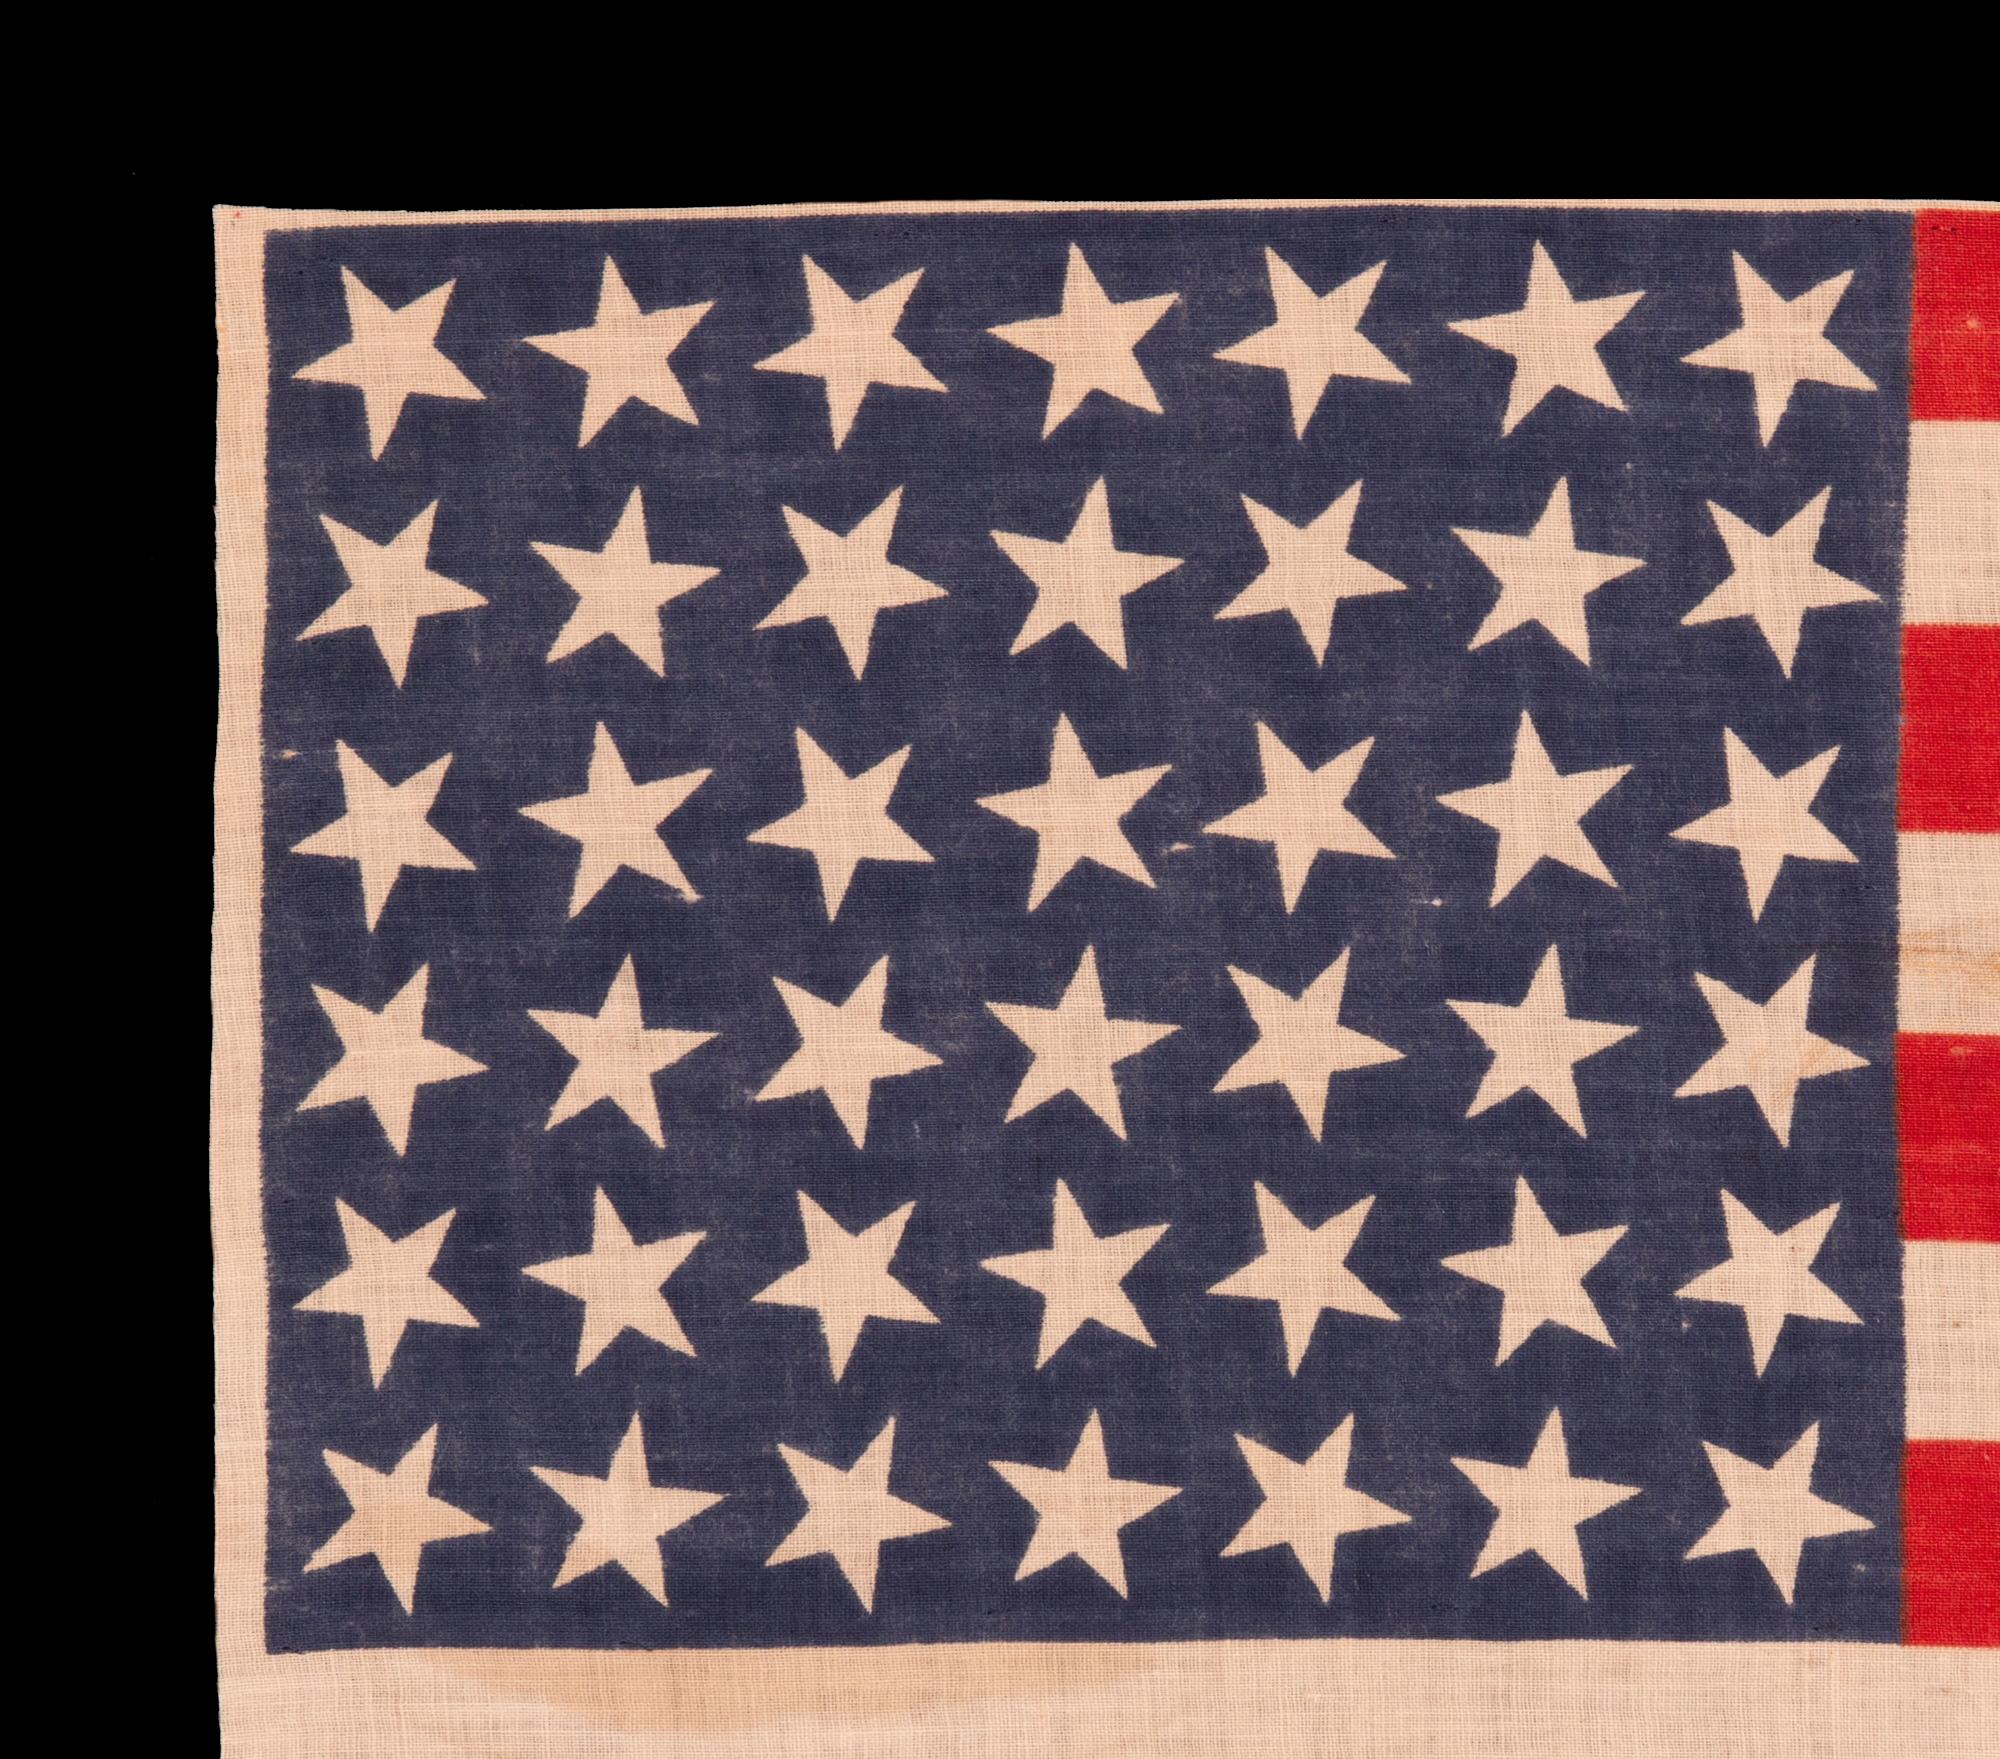 42 STARS ON AN ANTIQUE AMERICAN FLAG WITH SCATTERED STAR POSITIONING, REFLECTS THE ADDITION OF WASHINGTON STATE, MONTANA, AND THE DAKOTAS, NEVER AN OFFICIAL STAR COUNT, circa 1889-1890

42 star parade flag, printed on plain weave cotton. The stars